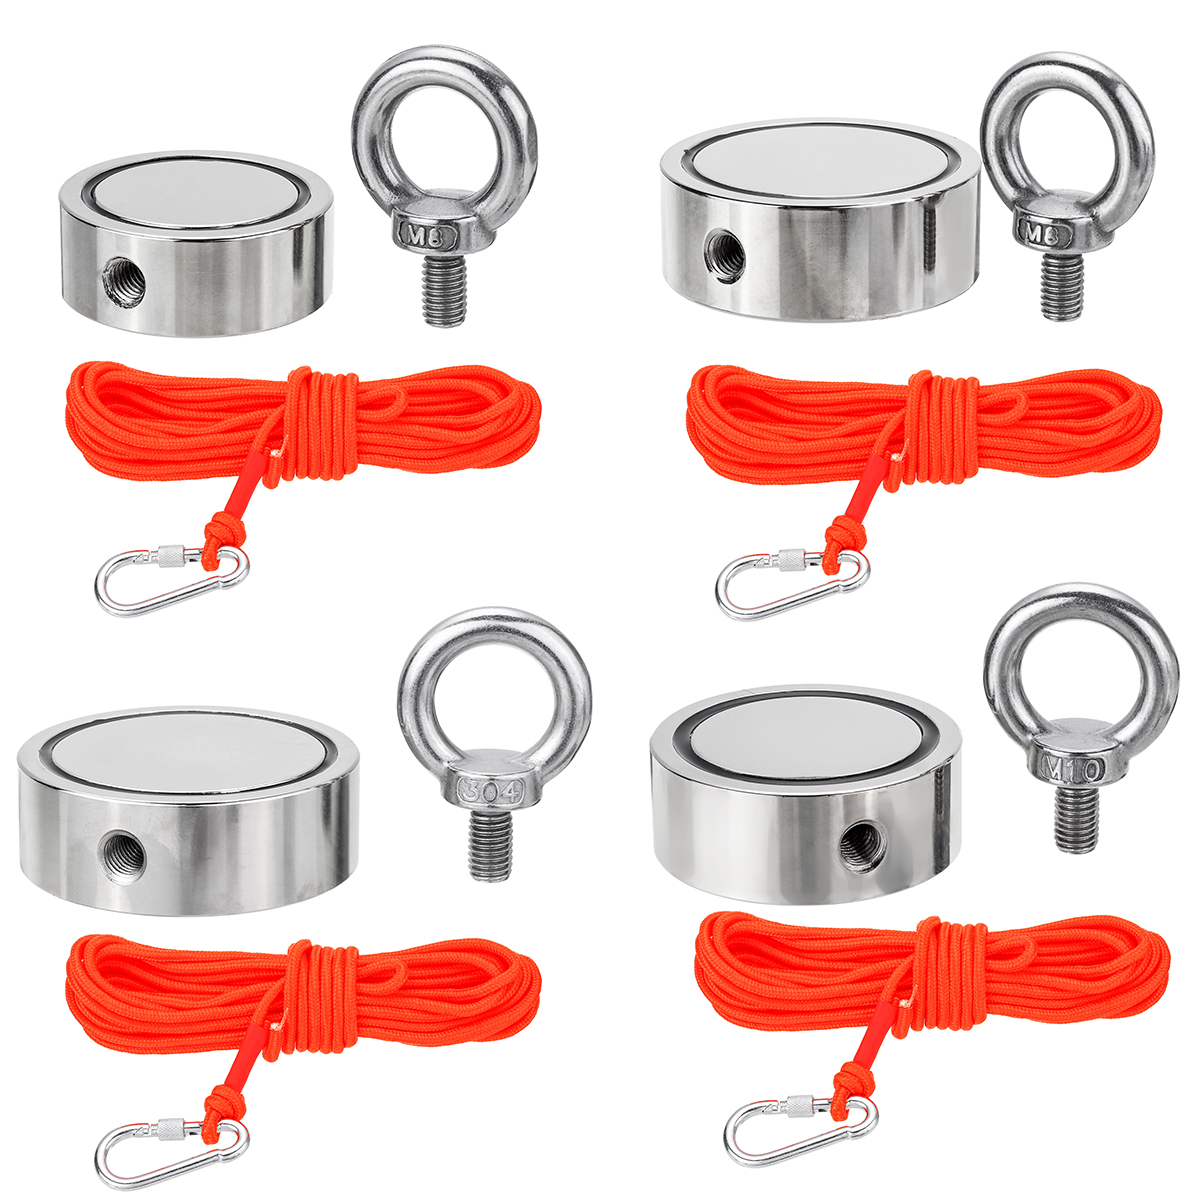 Find 80-200KG Double Side Neodymium Fishing Salvage Recovery Magnet with 10M Rope for Detecting Metal Treasure for Sale on Gipsybee.com with cryptocurrencies